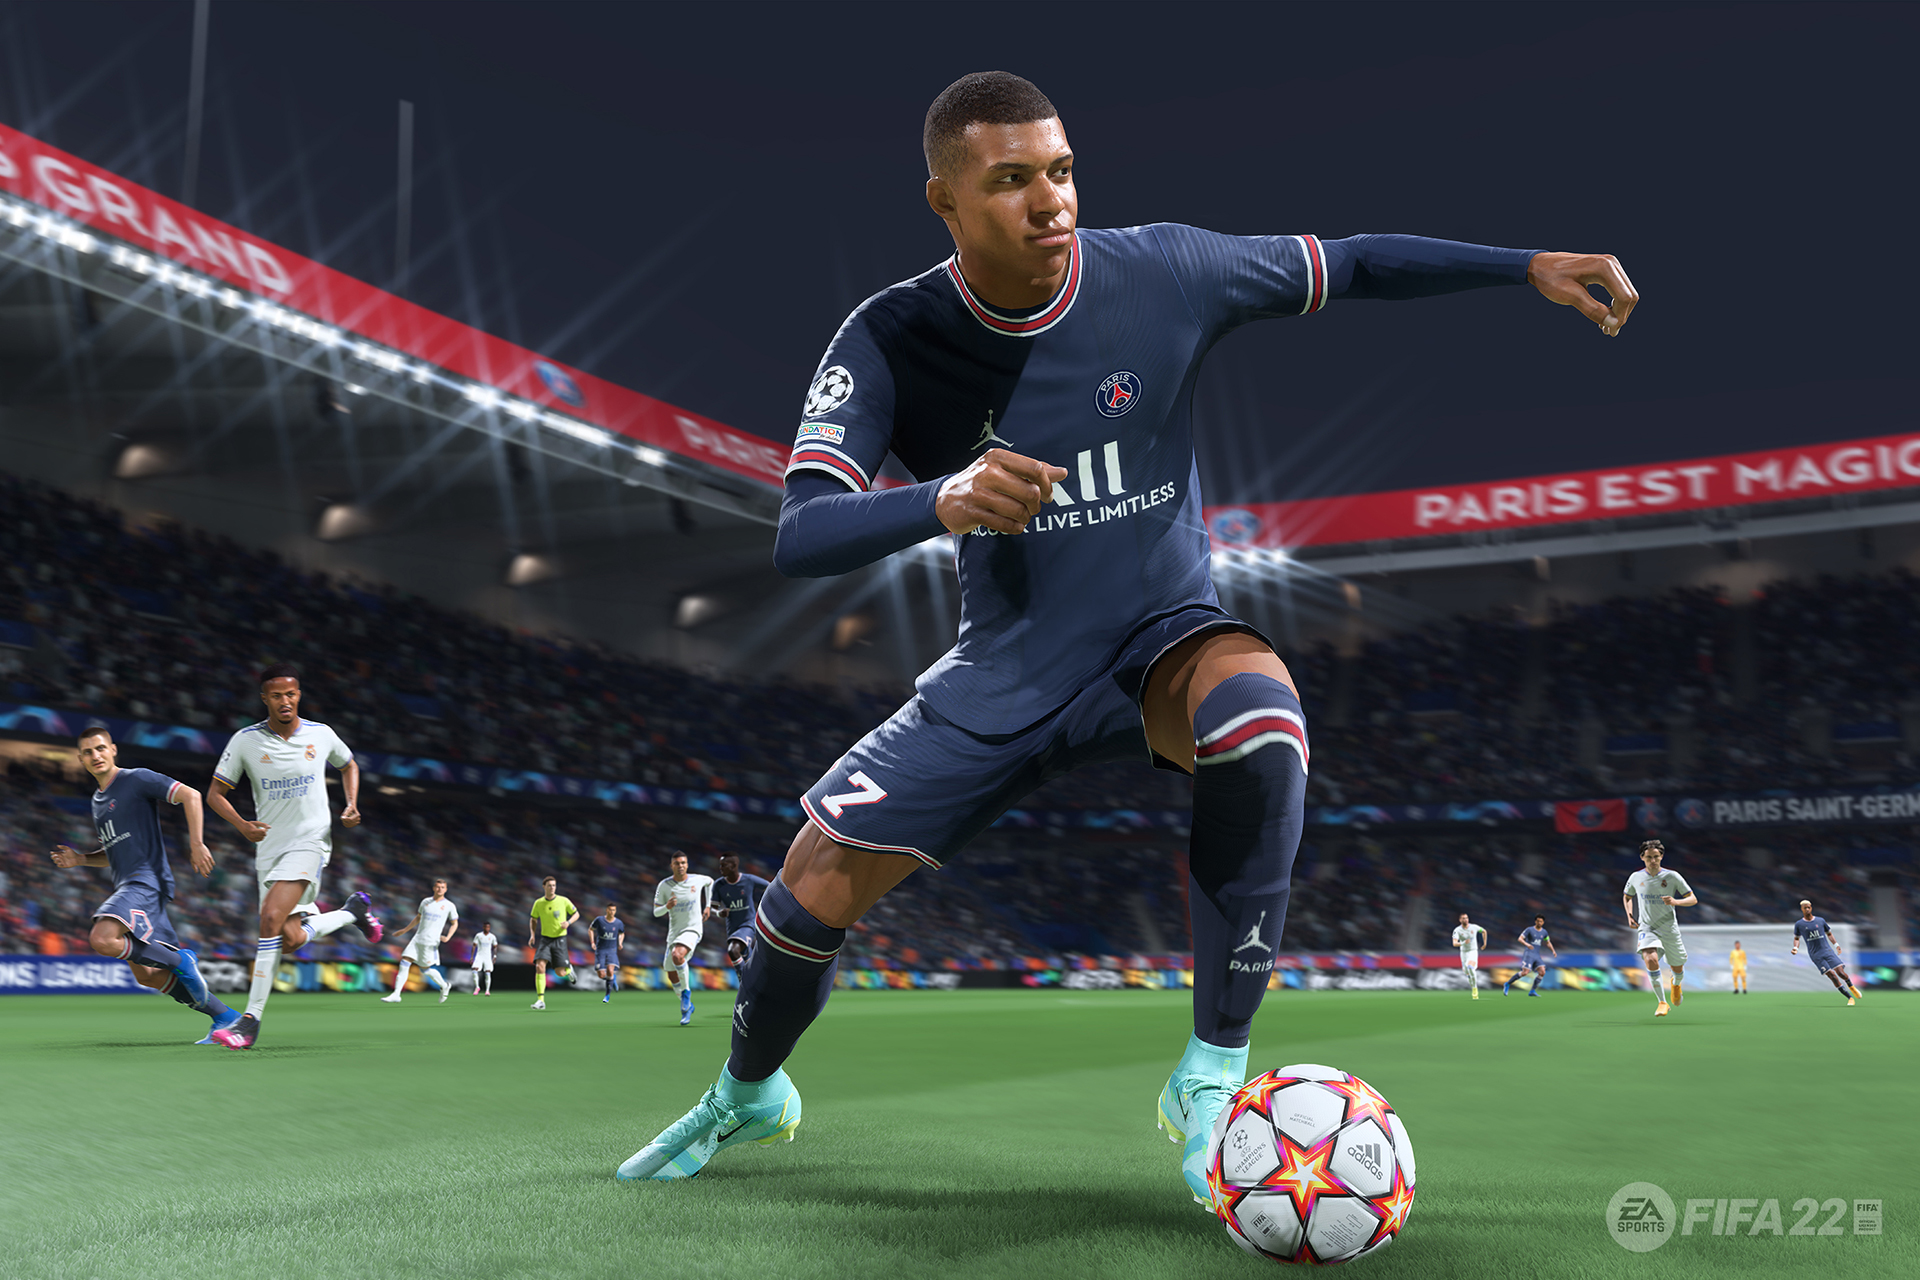 FIFA shouldn’t be any longer overjoyed with EA’s dominance of soccer games